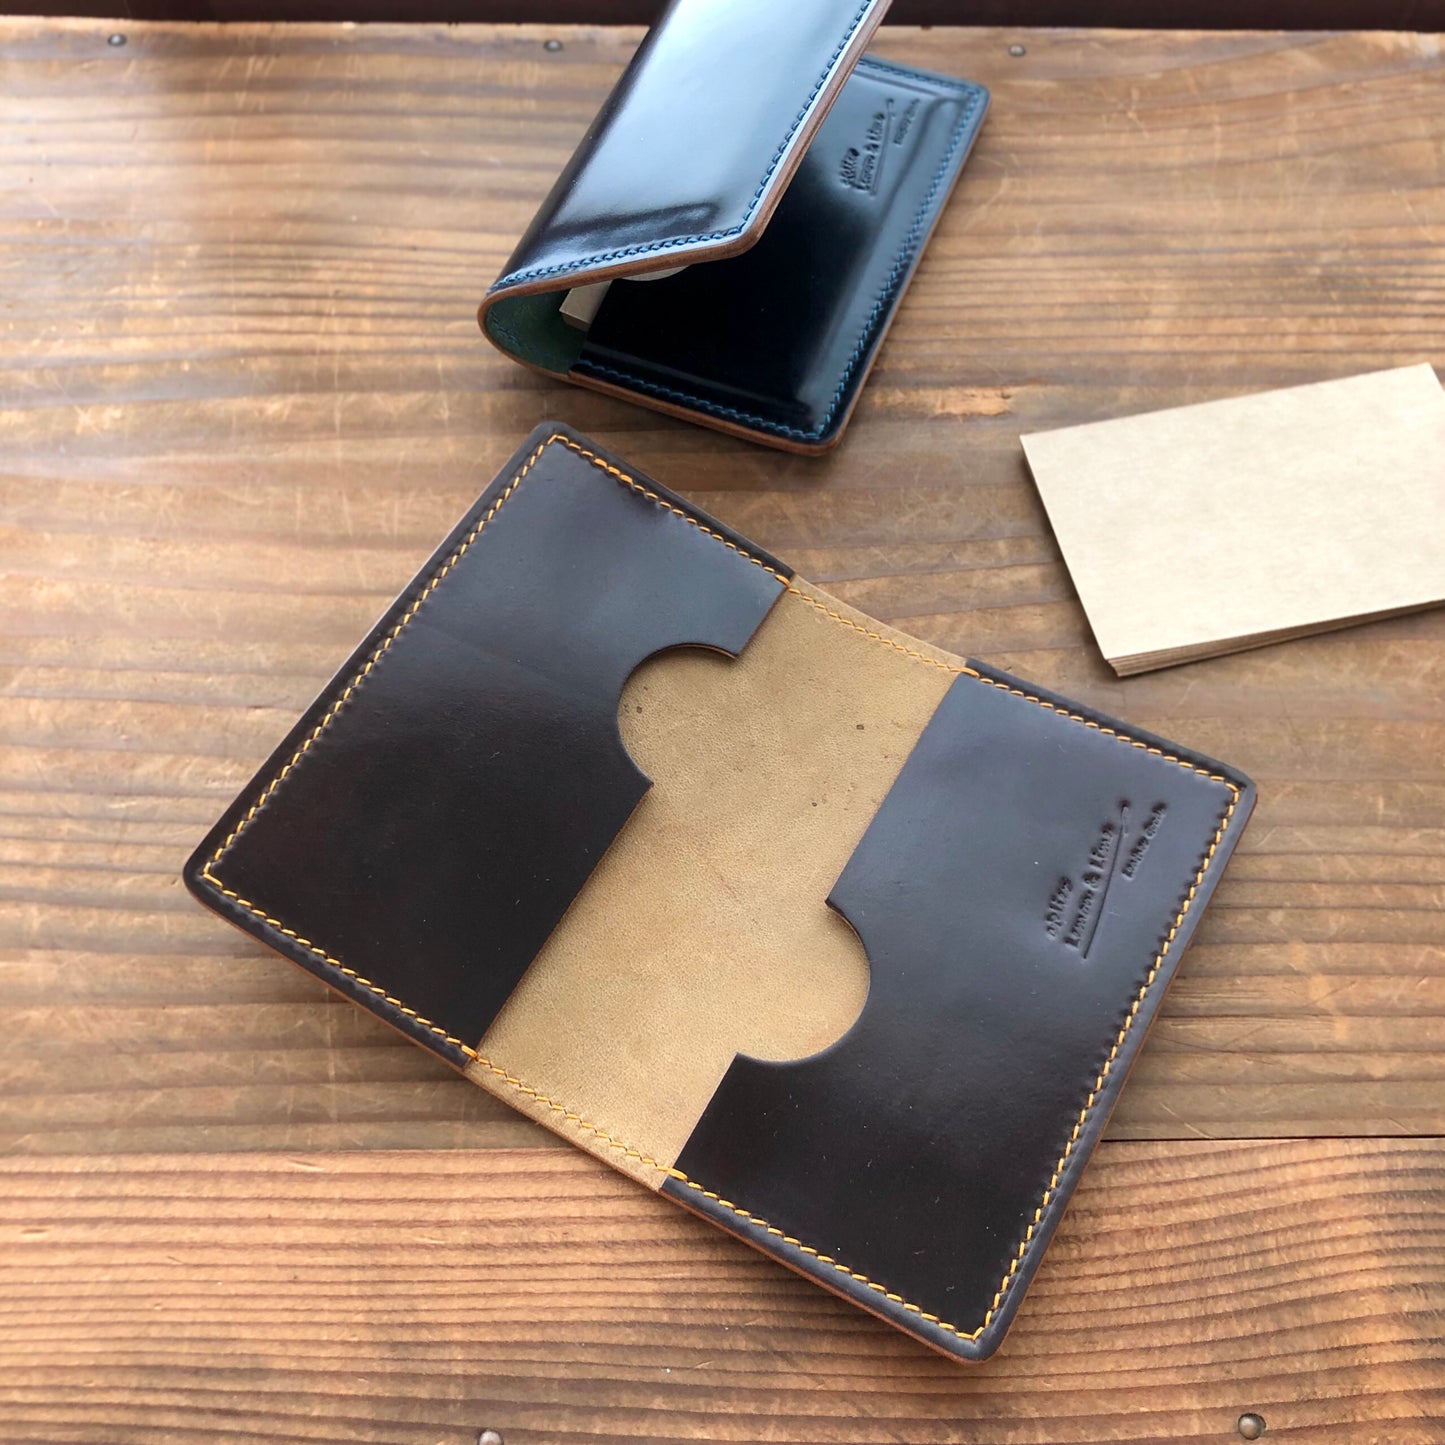 Shell Card Wallet for business cards【Horween】シェルコードバンの名刺入れ